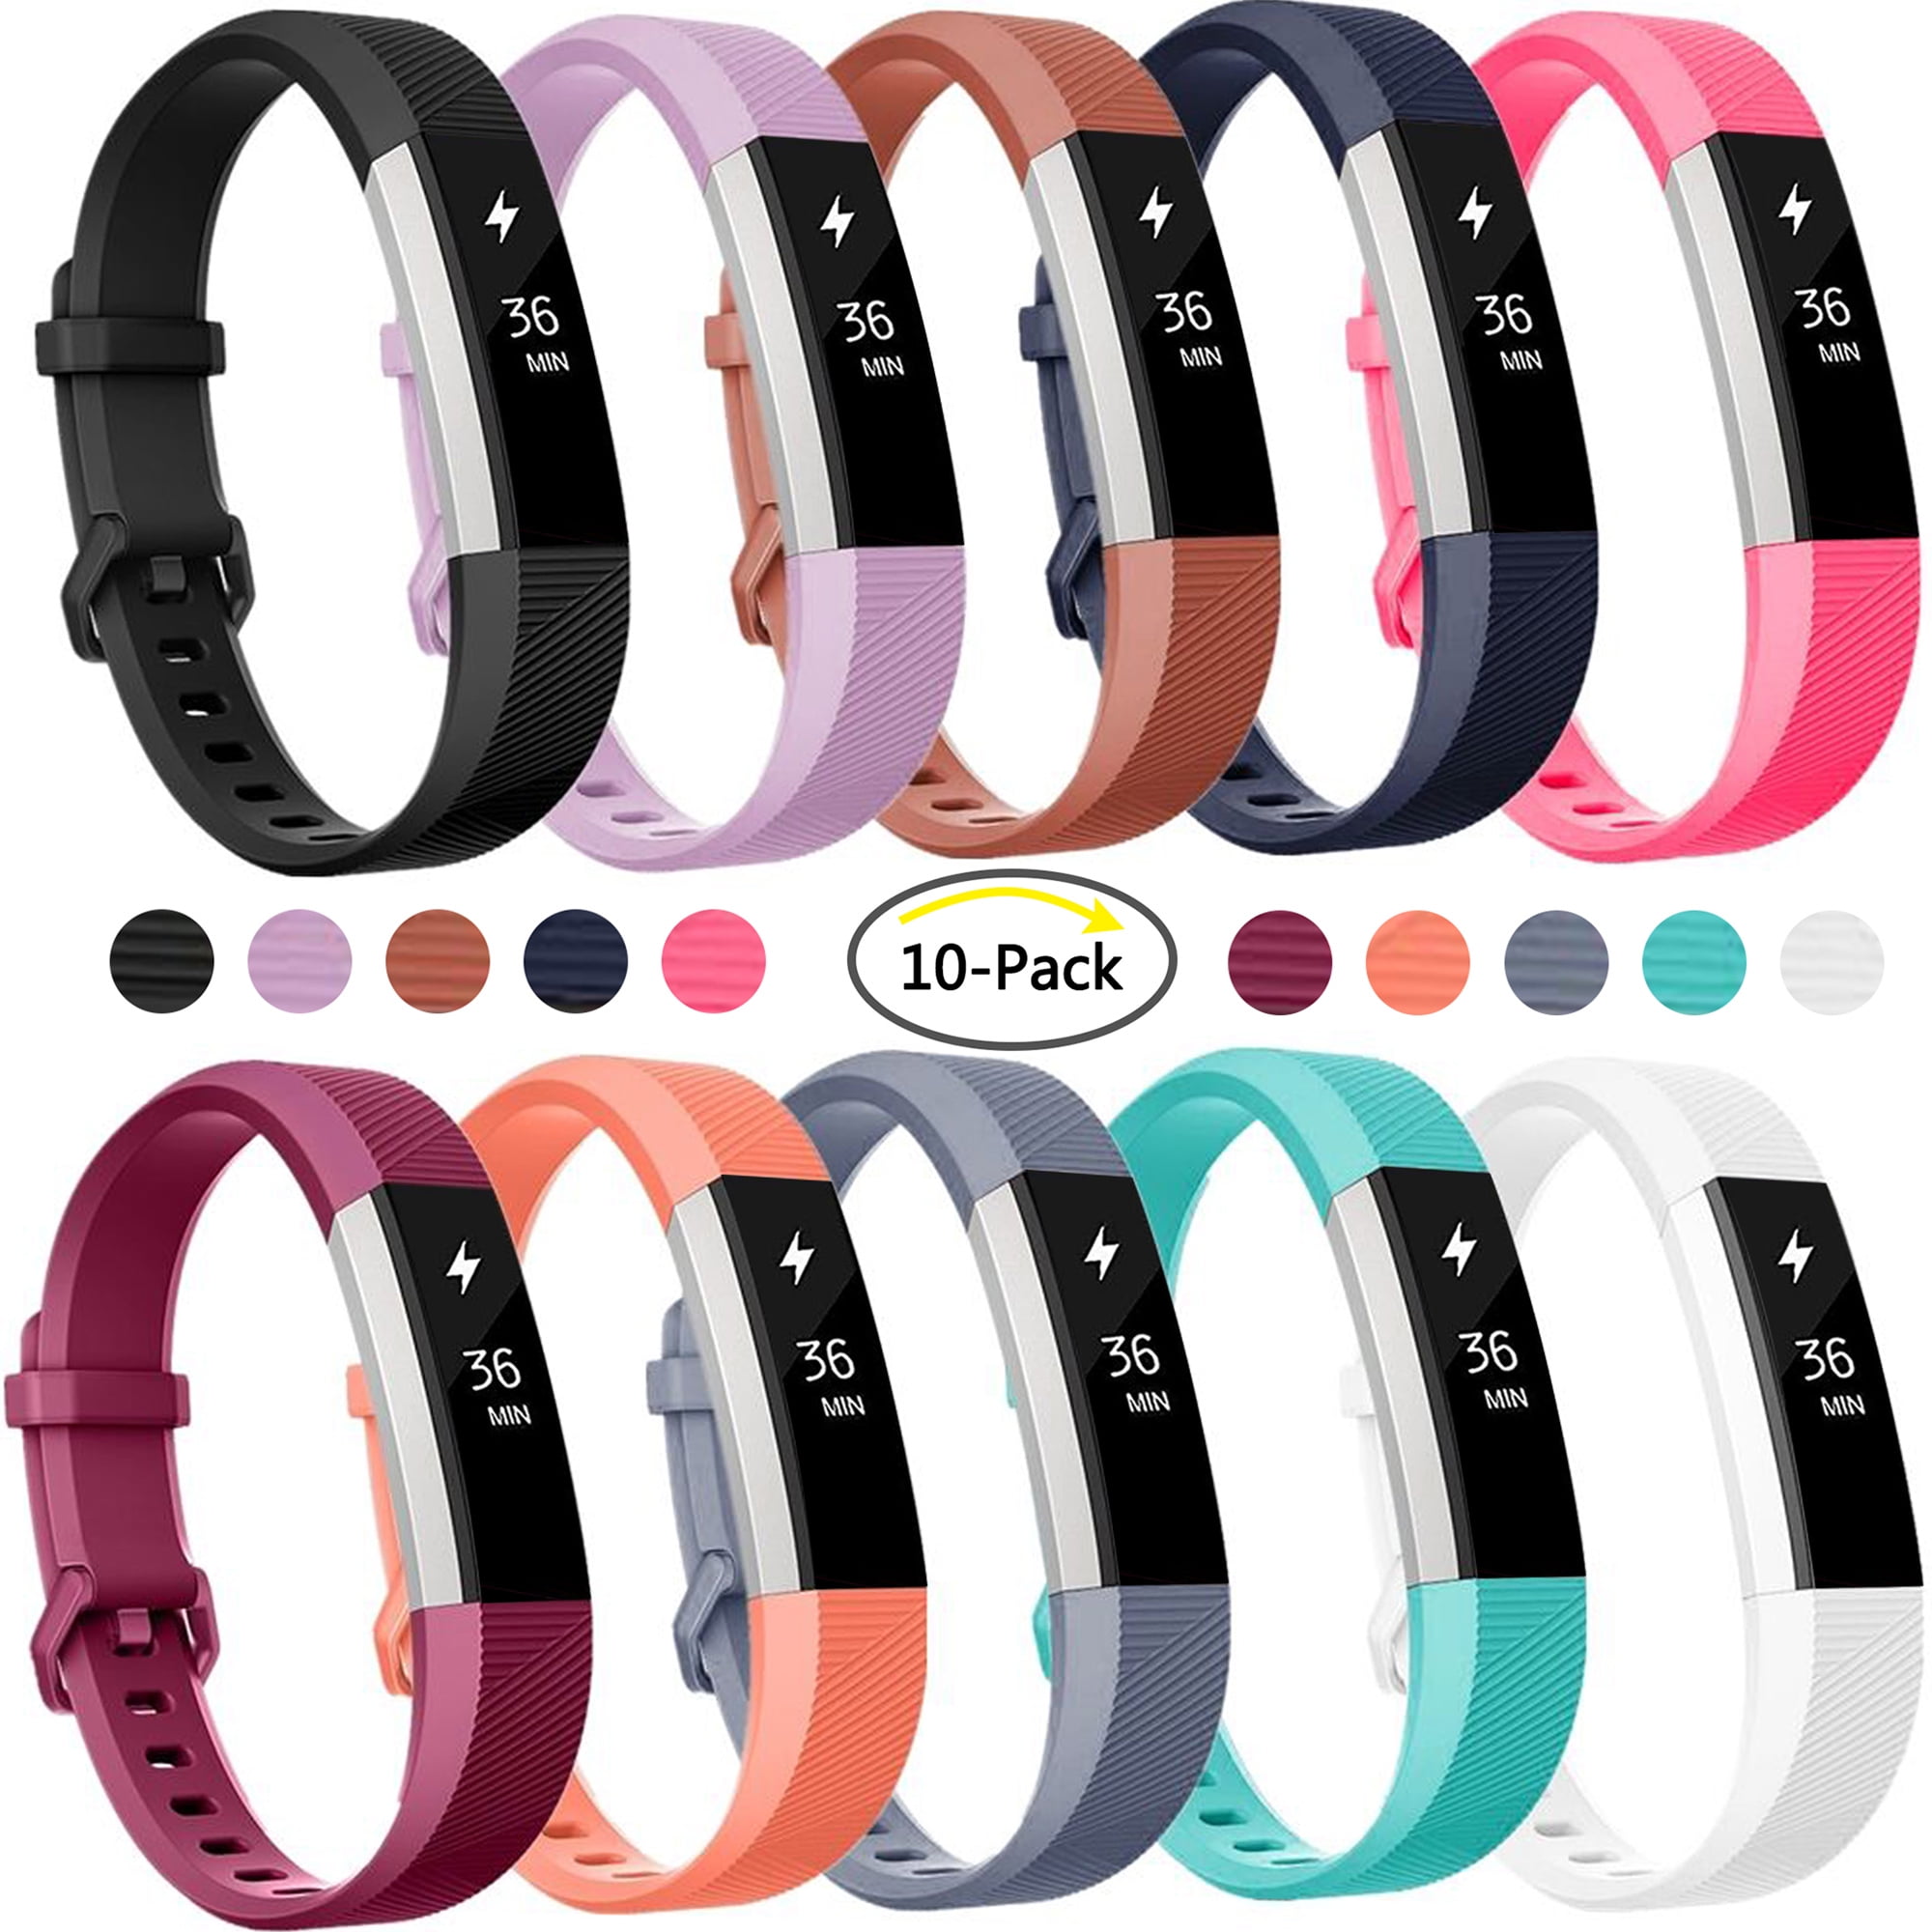 iGK Replacement Bands Compatible for Fitbit Alta and Fitbit Alta HR Newest Adjustable Sport Strap Smartwatch Fitness Wristbands 3 Packs 